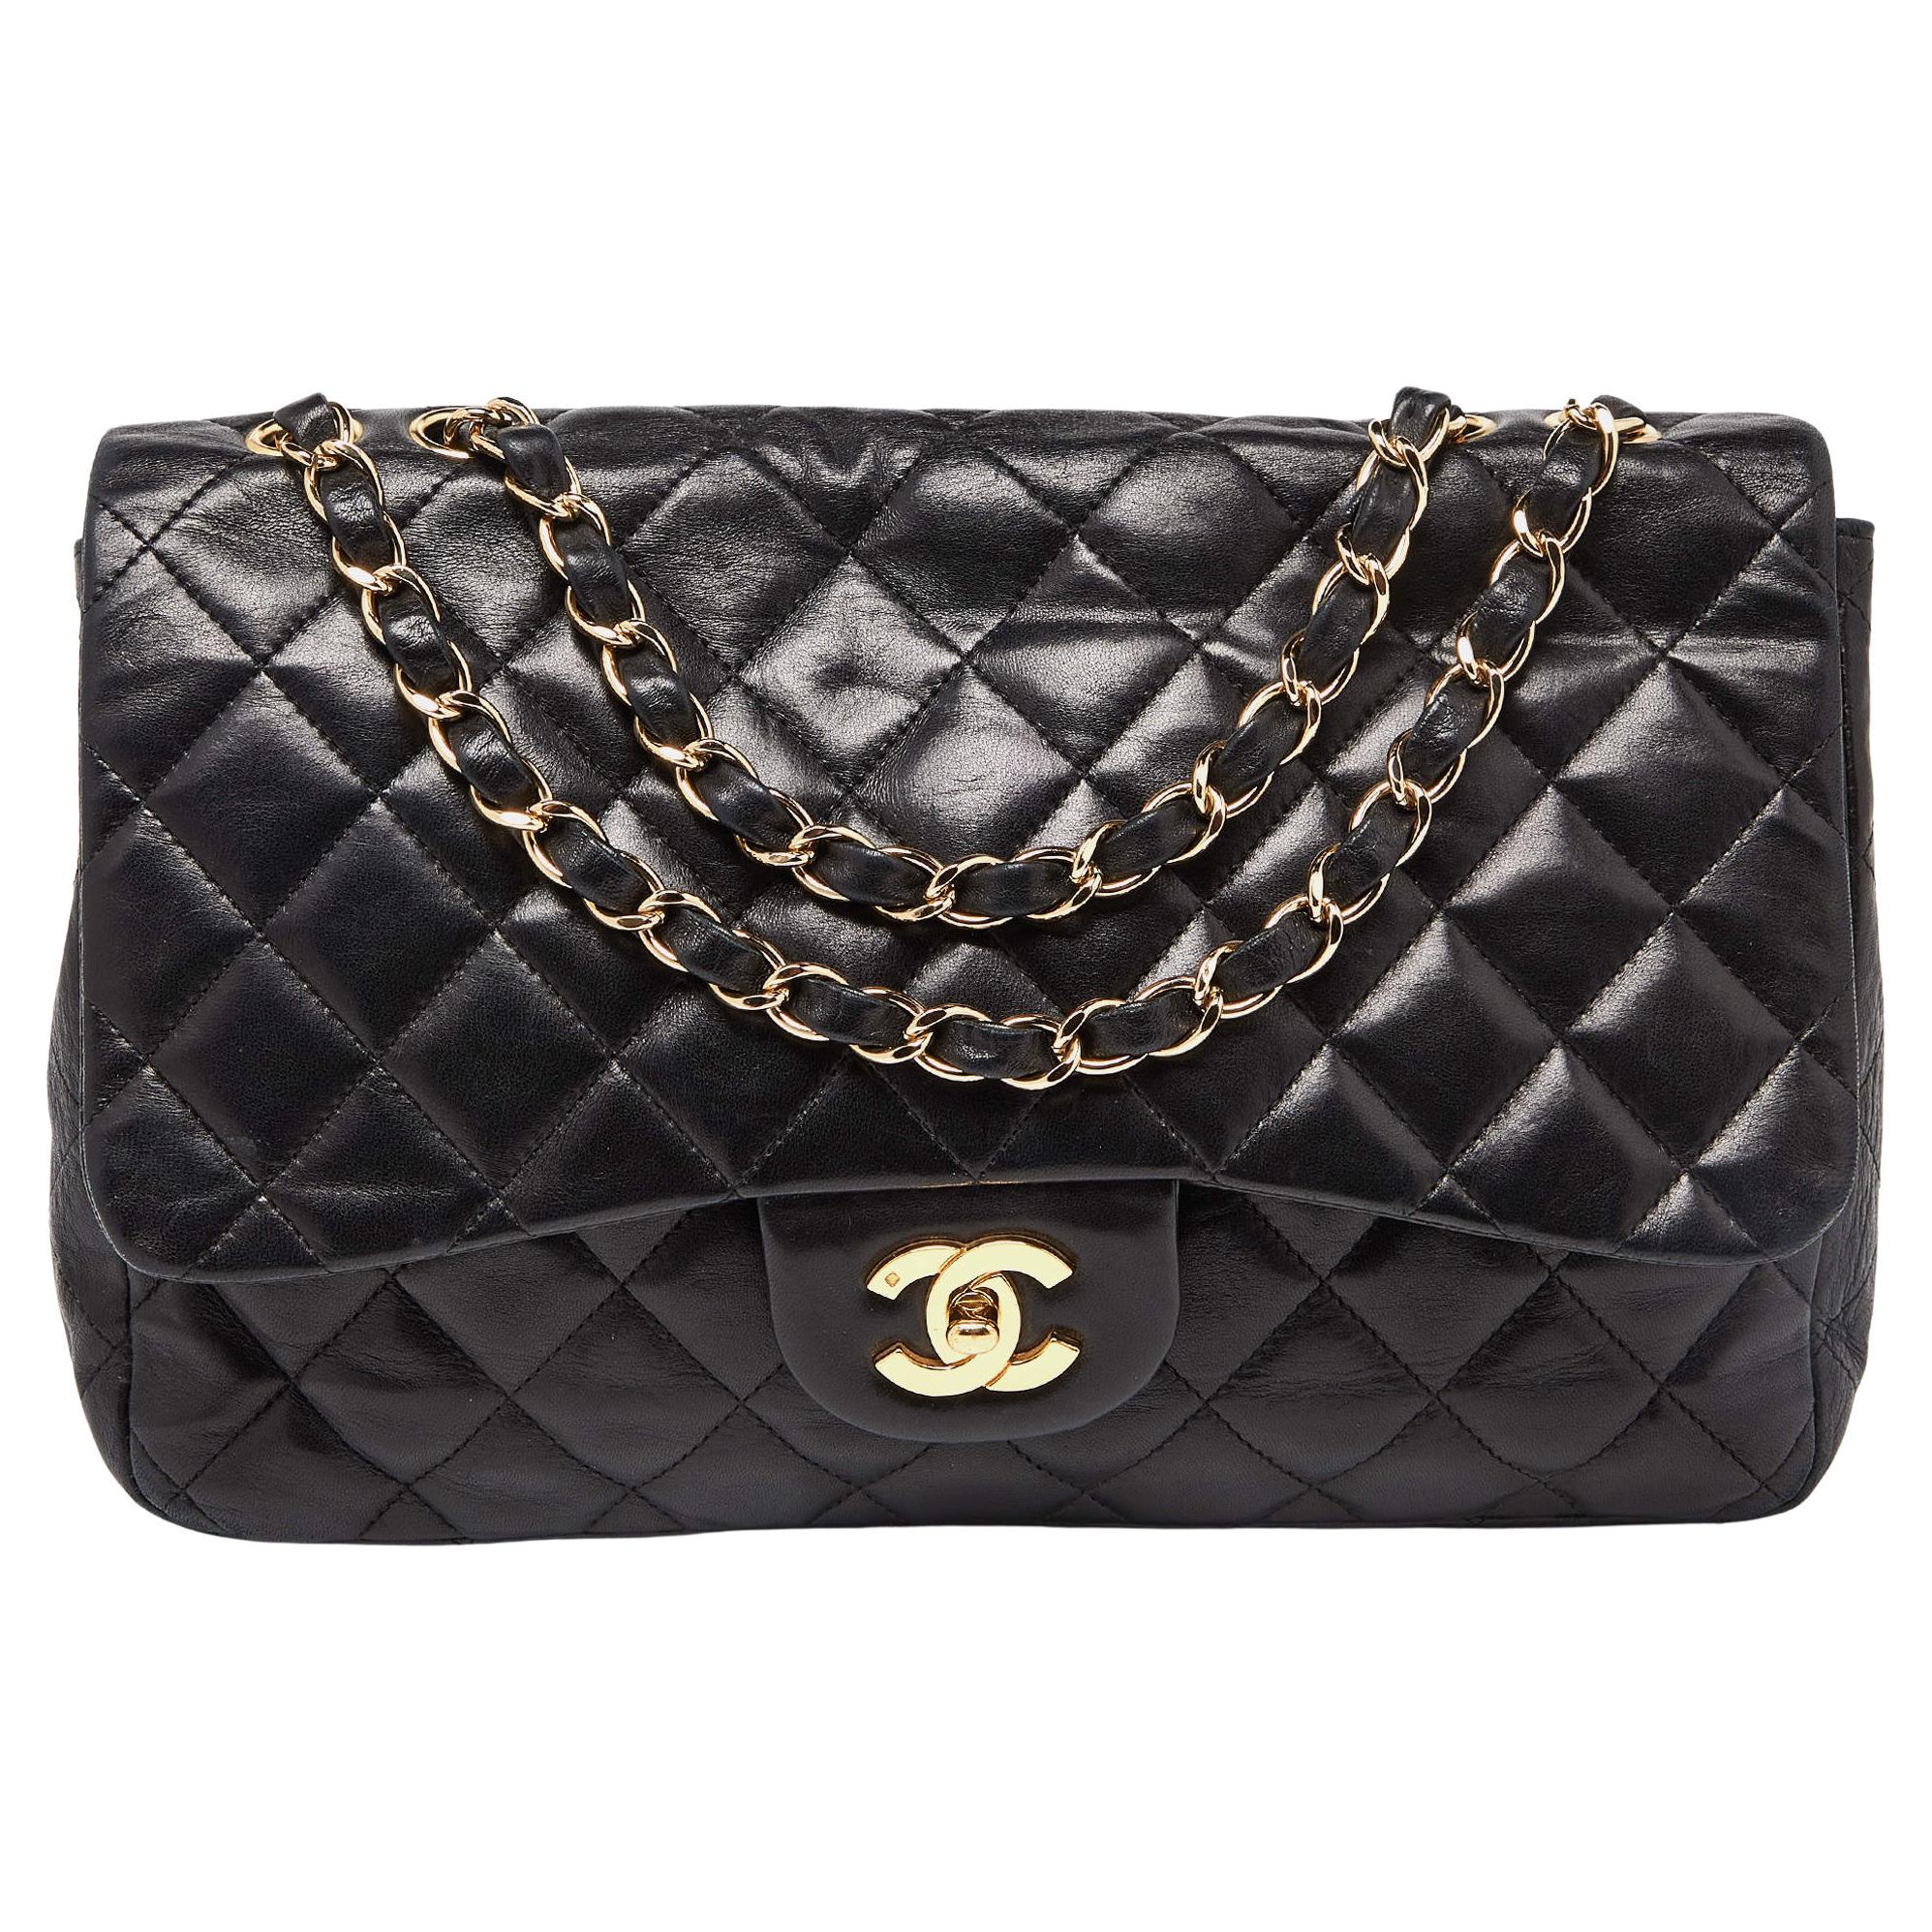 Chanel Black Quilted Leather Jumbo Classic Single Flap Bag For Sale